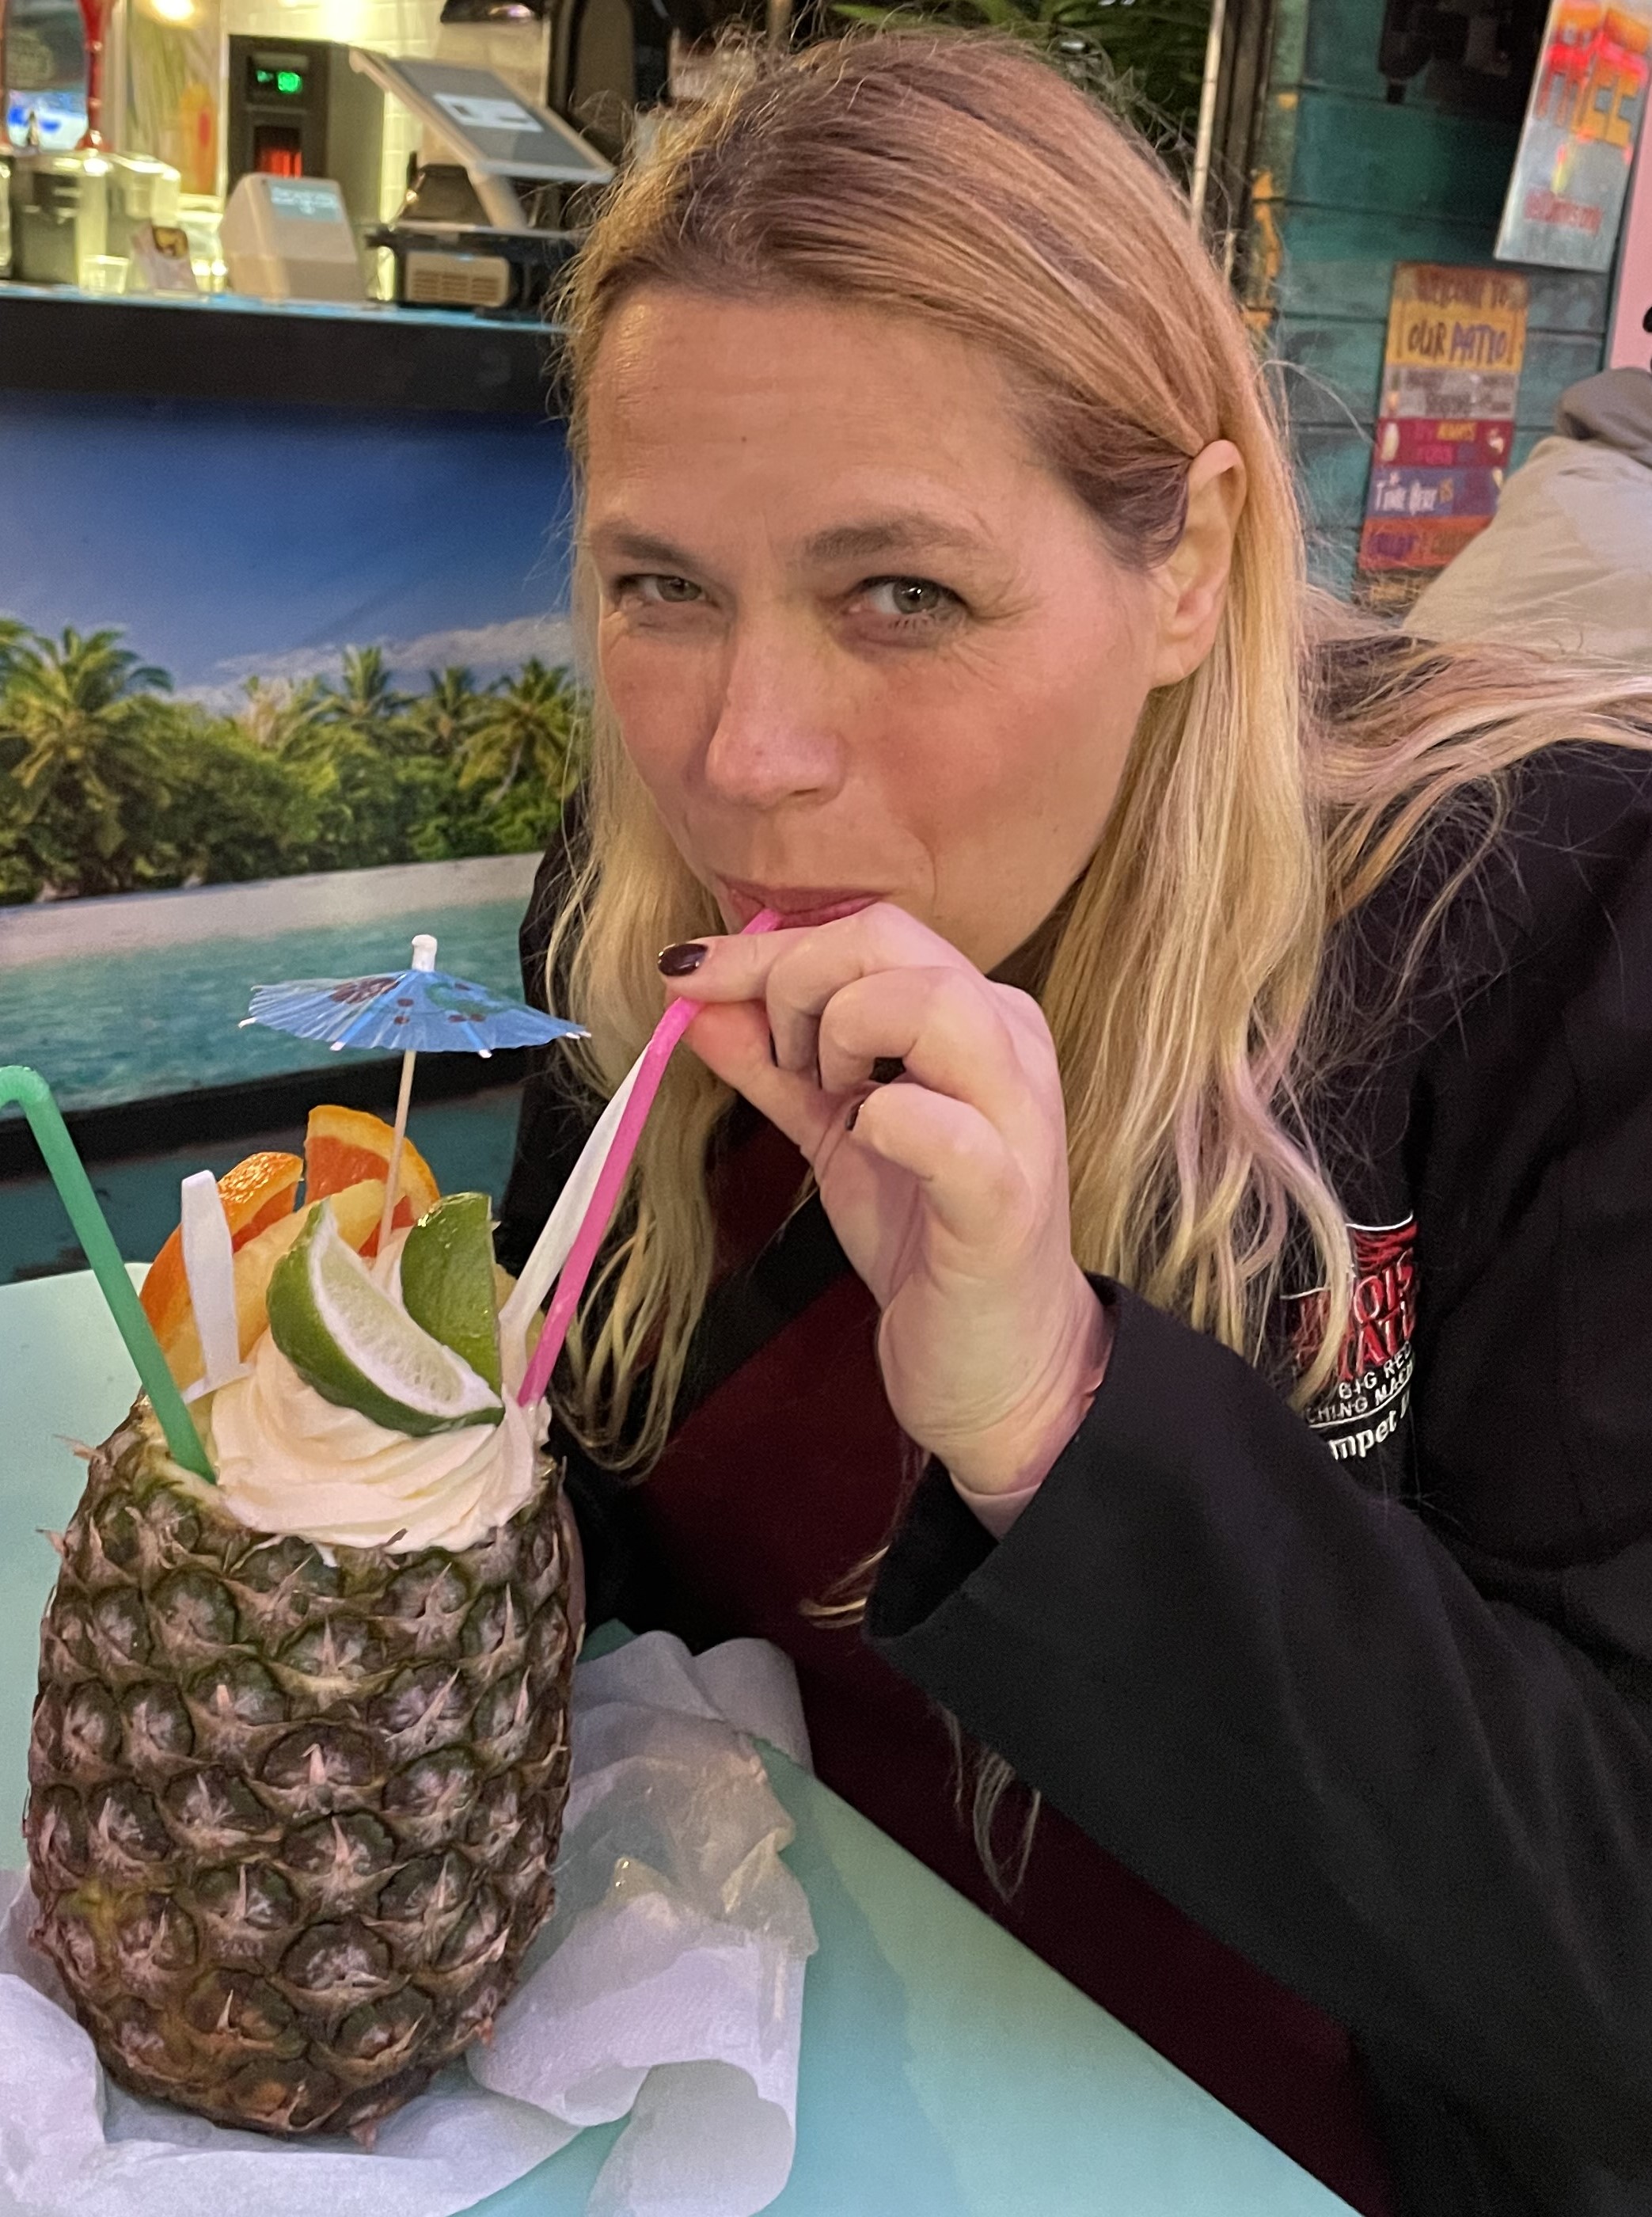 Mari smiling at the camera while drinking a fruity ice cream drink from a pineapple.